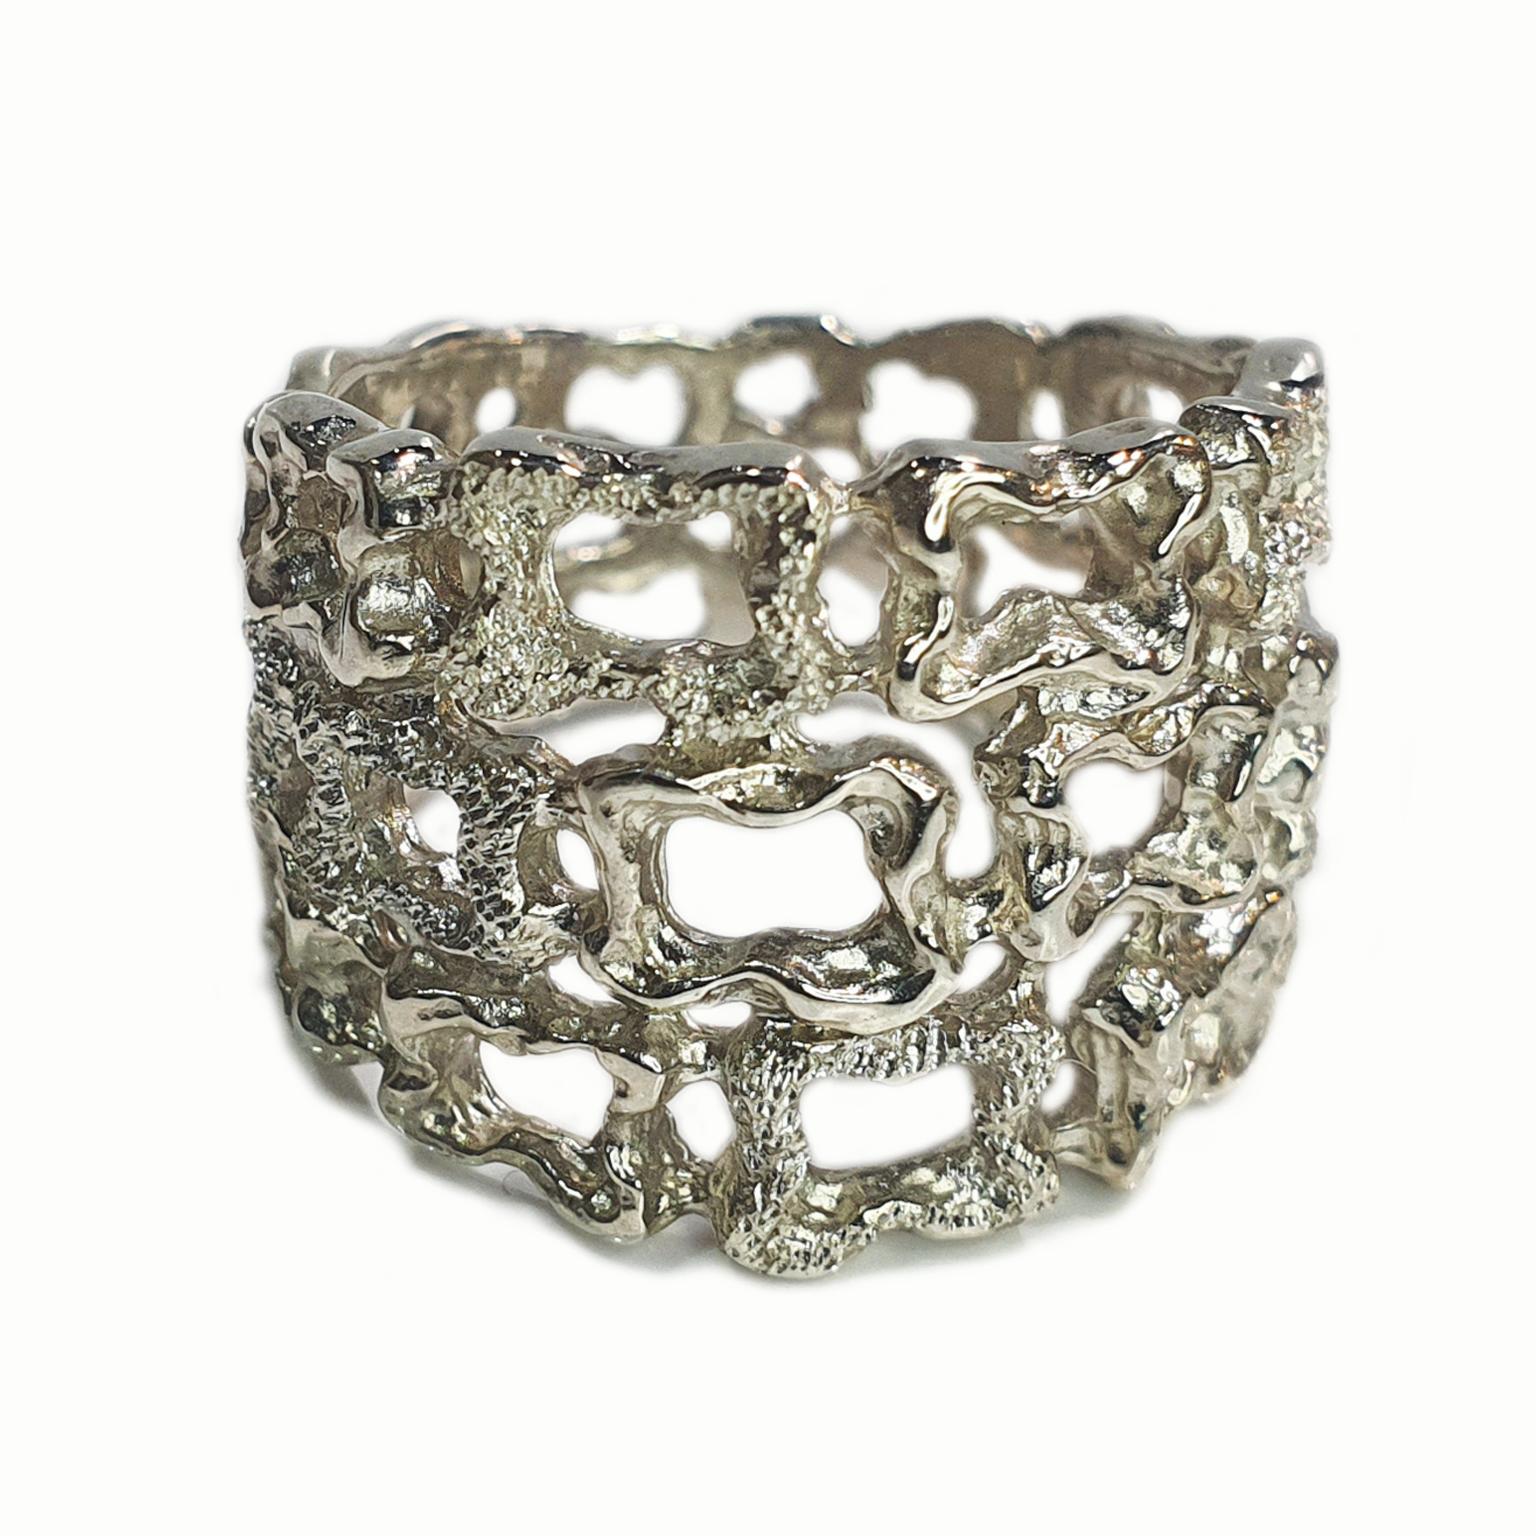 Paul Amey’s Silver Lace ring was crafted from tarnish resistant Sterling Silver. The ring features Paul Amey’s signature lace free form design and pin finish texture. The ring weights 7.2 grams and is currently size O (GB) or 7.5 (US) but can be